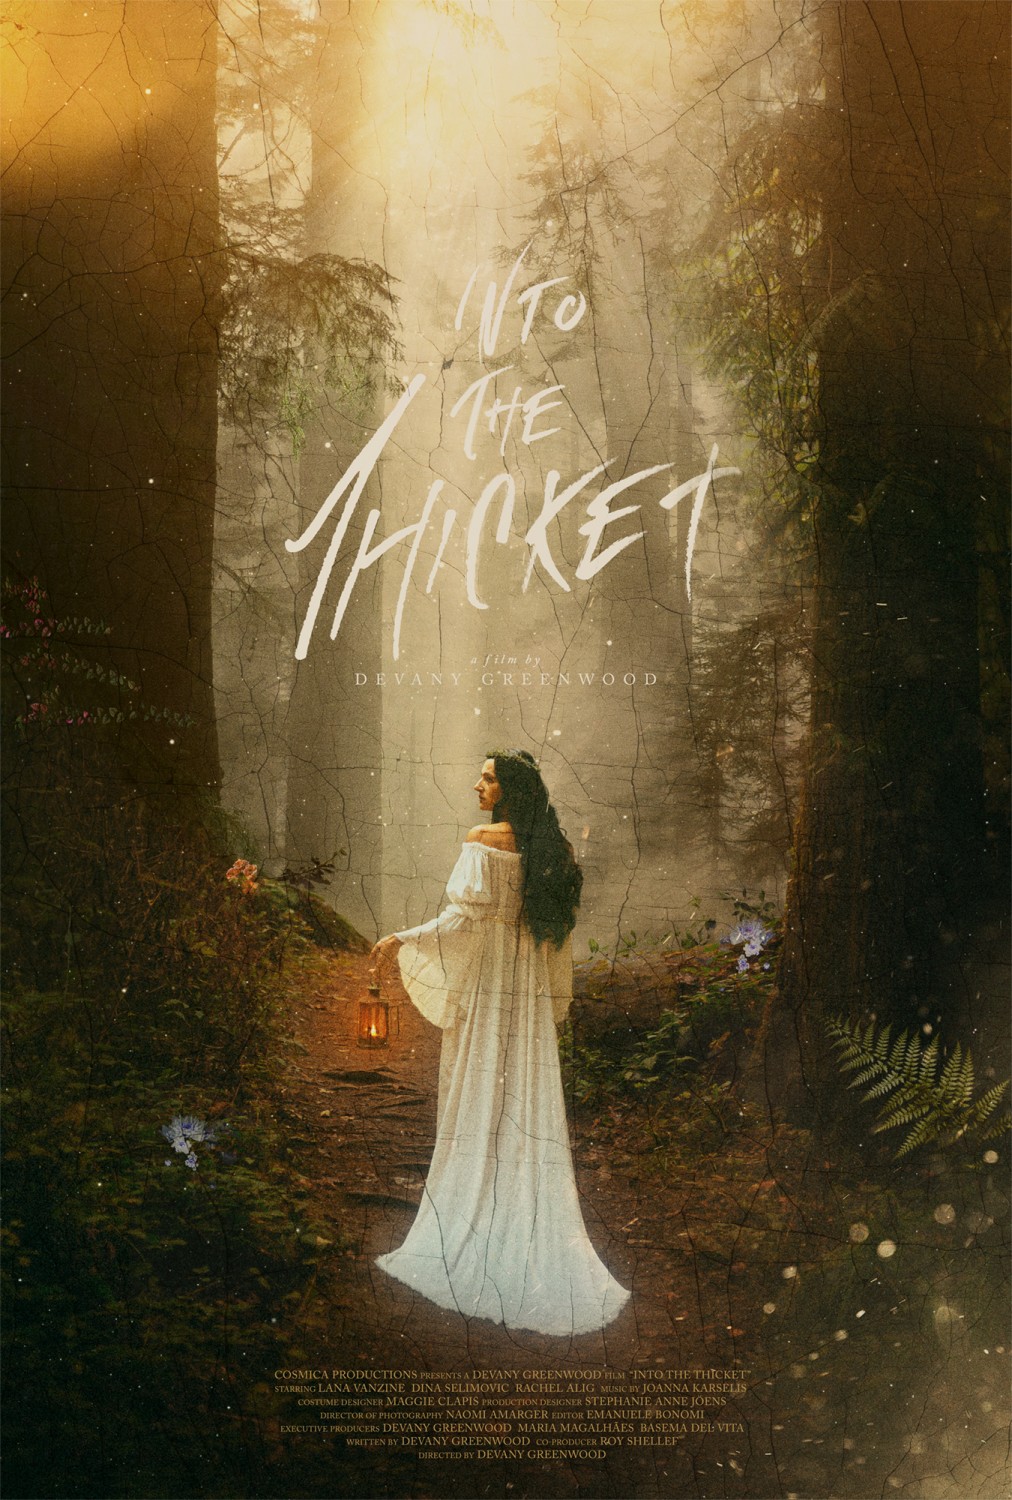 Extra Large Movie Poster Image for Into the Thicket